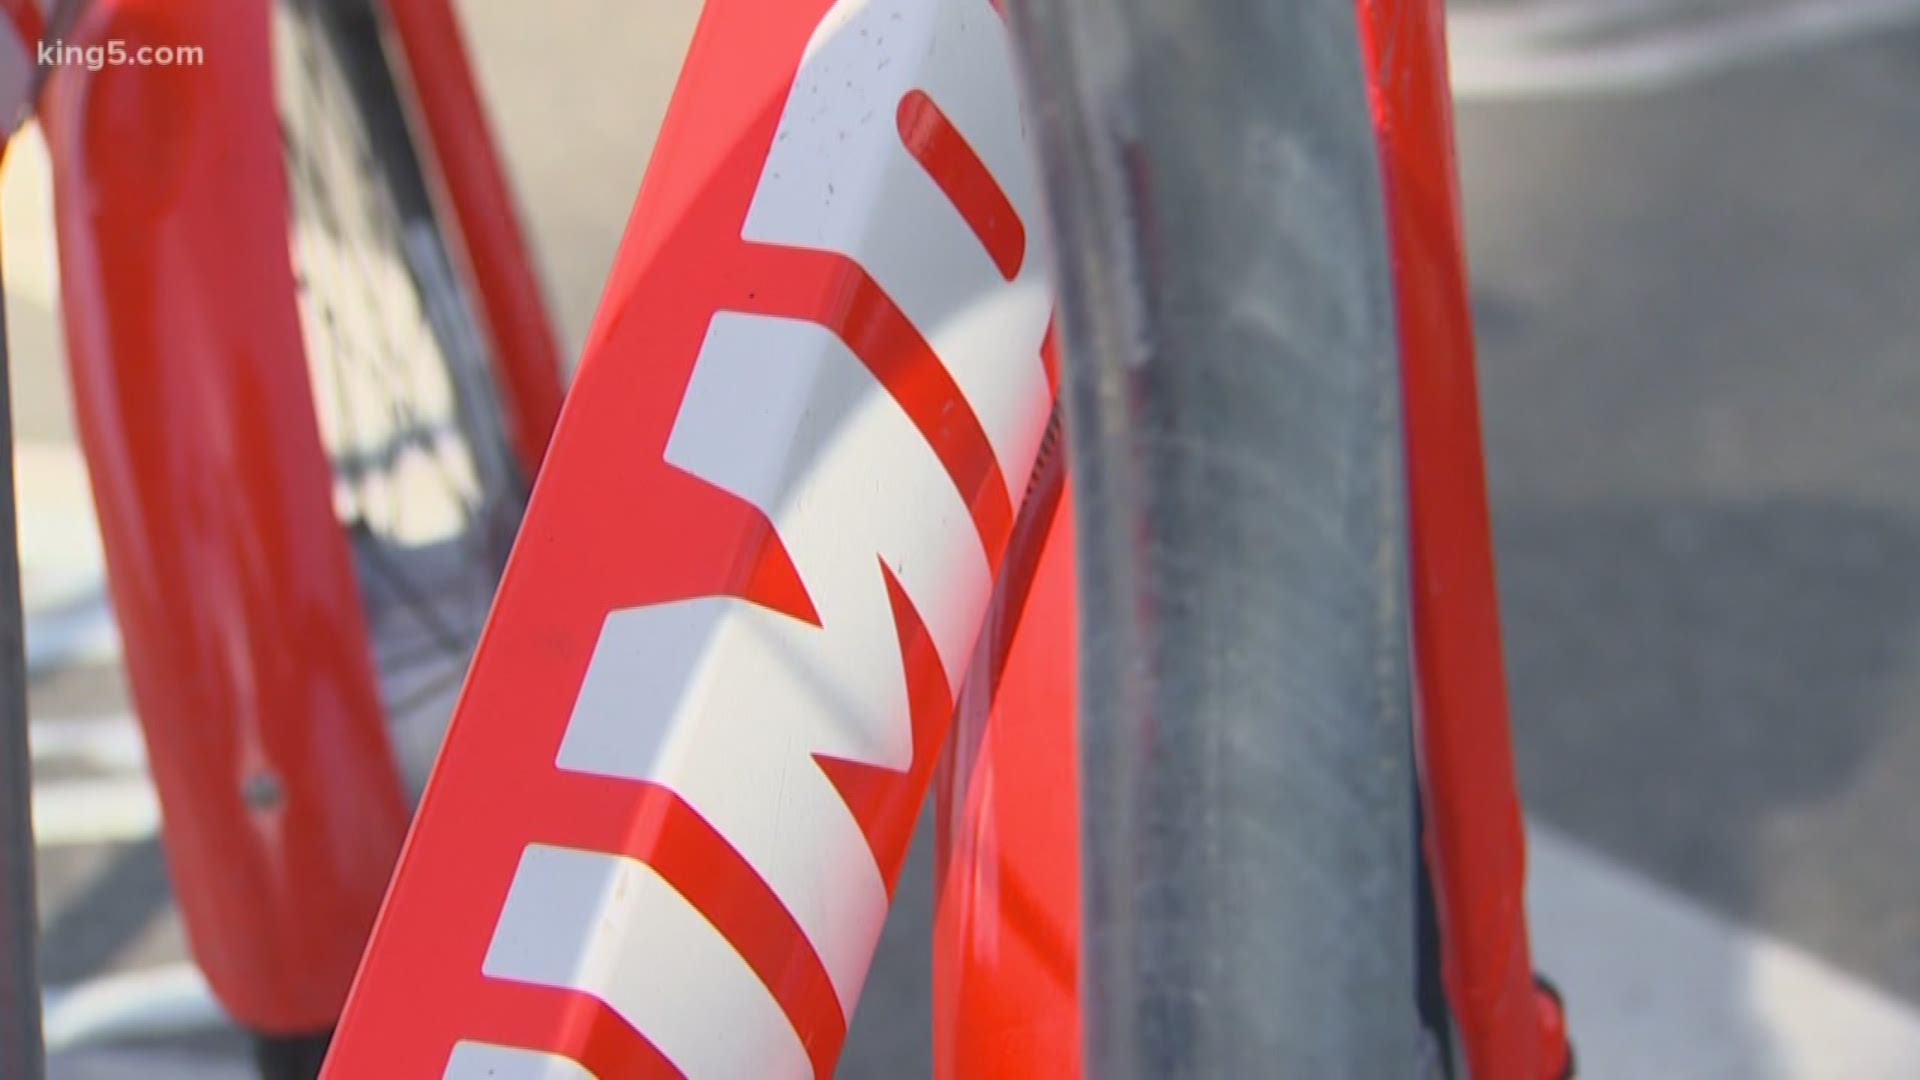 The City of Seattle has told bike share companies to reduce their fleet by 1,000 bikes and reduce clutter on city streets. KING 5's Natalie Swaby reports.